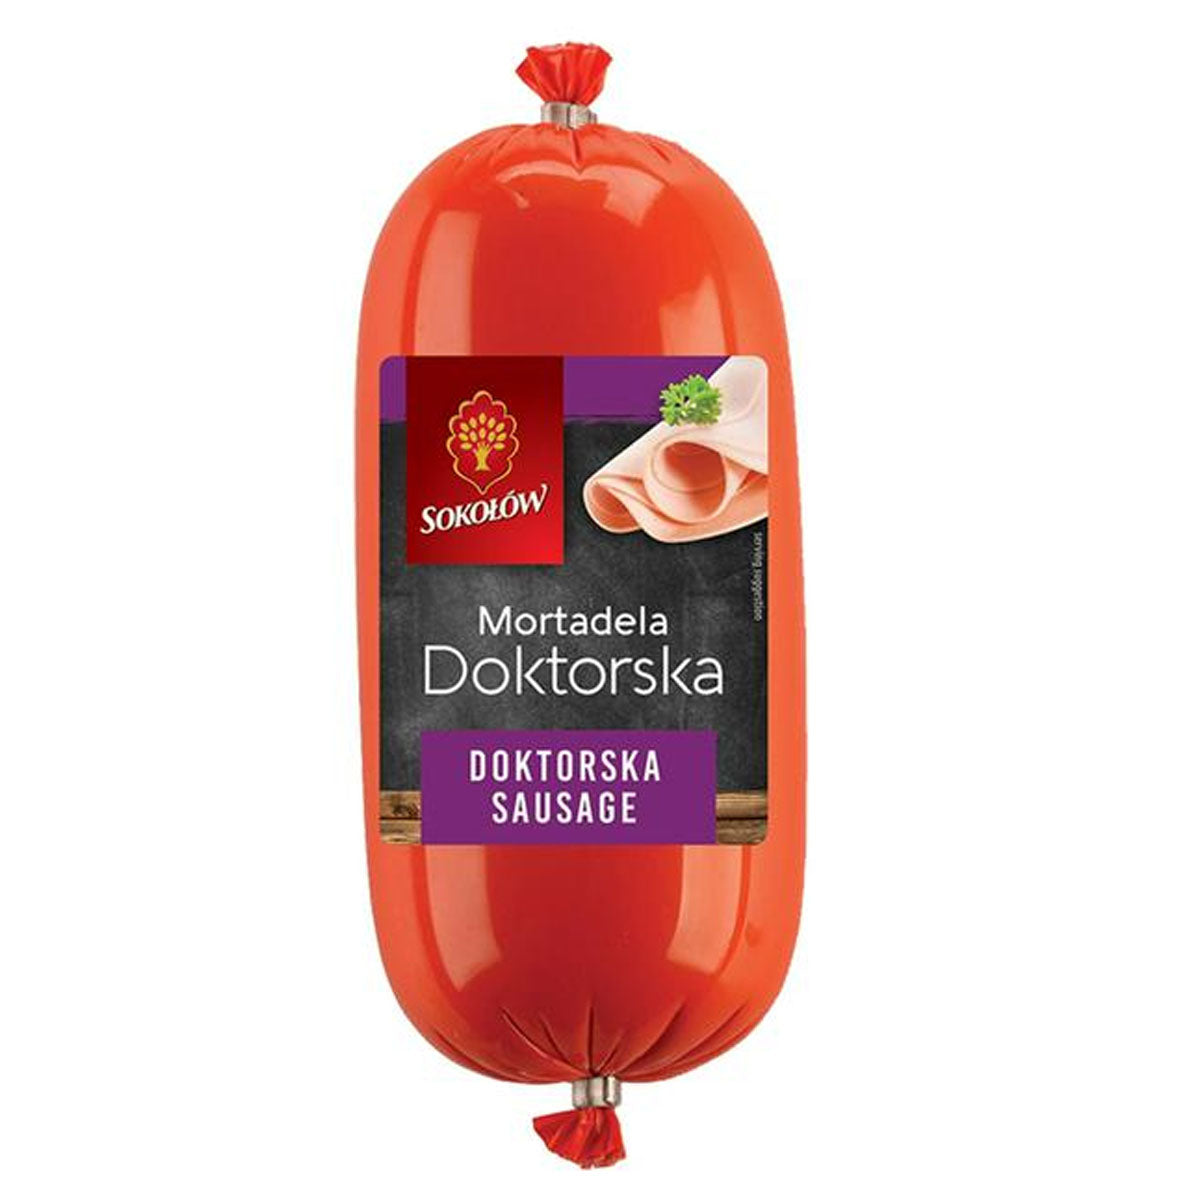 A Sokolow - Doktorska Sausage - 500g with a red label on it.